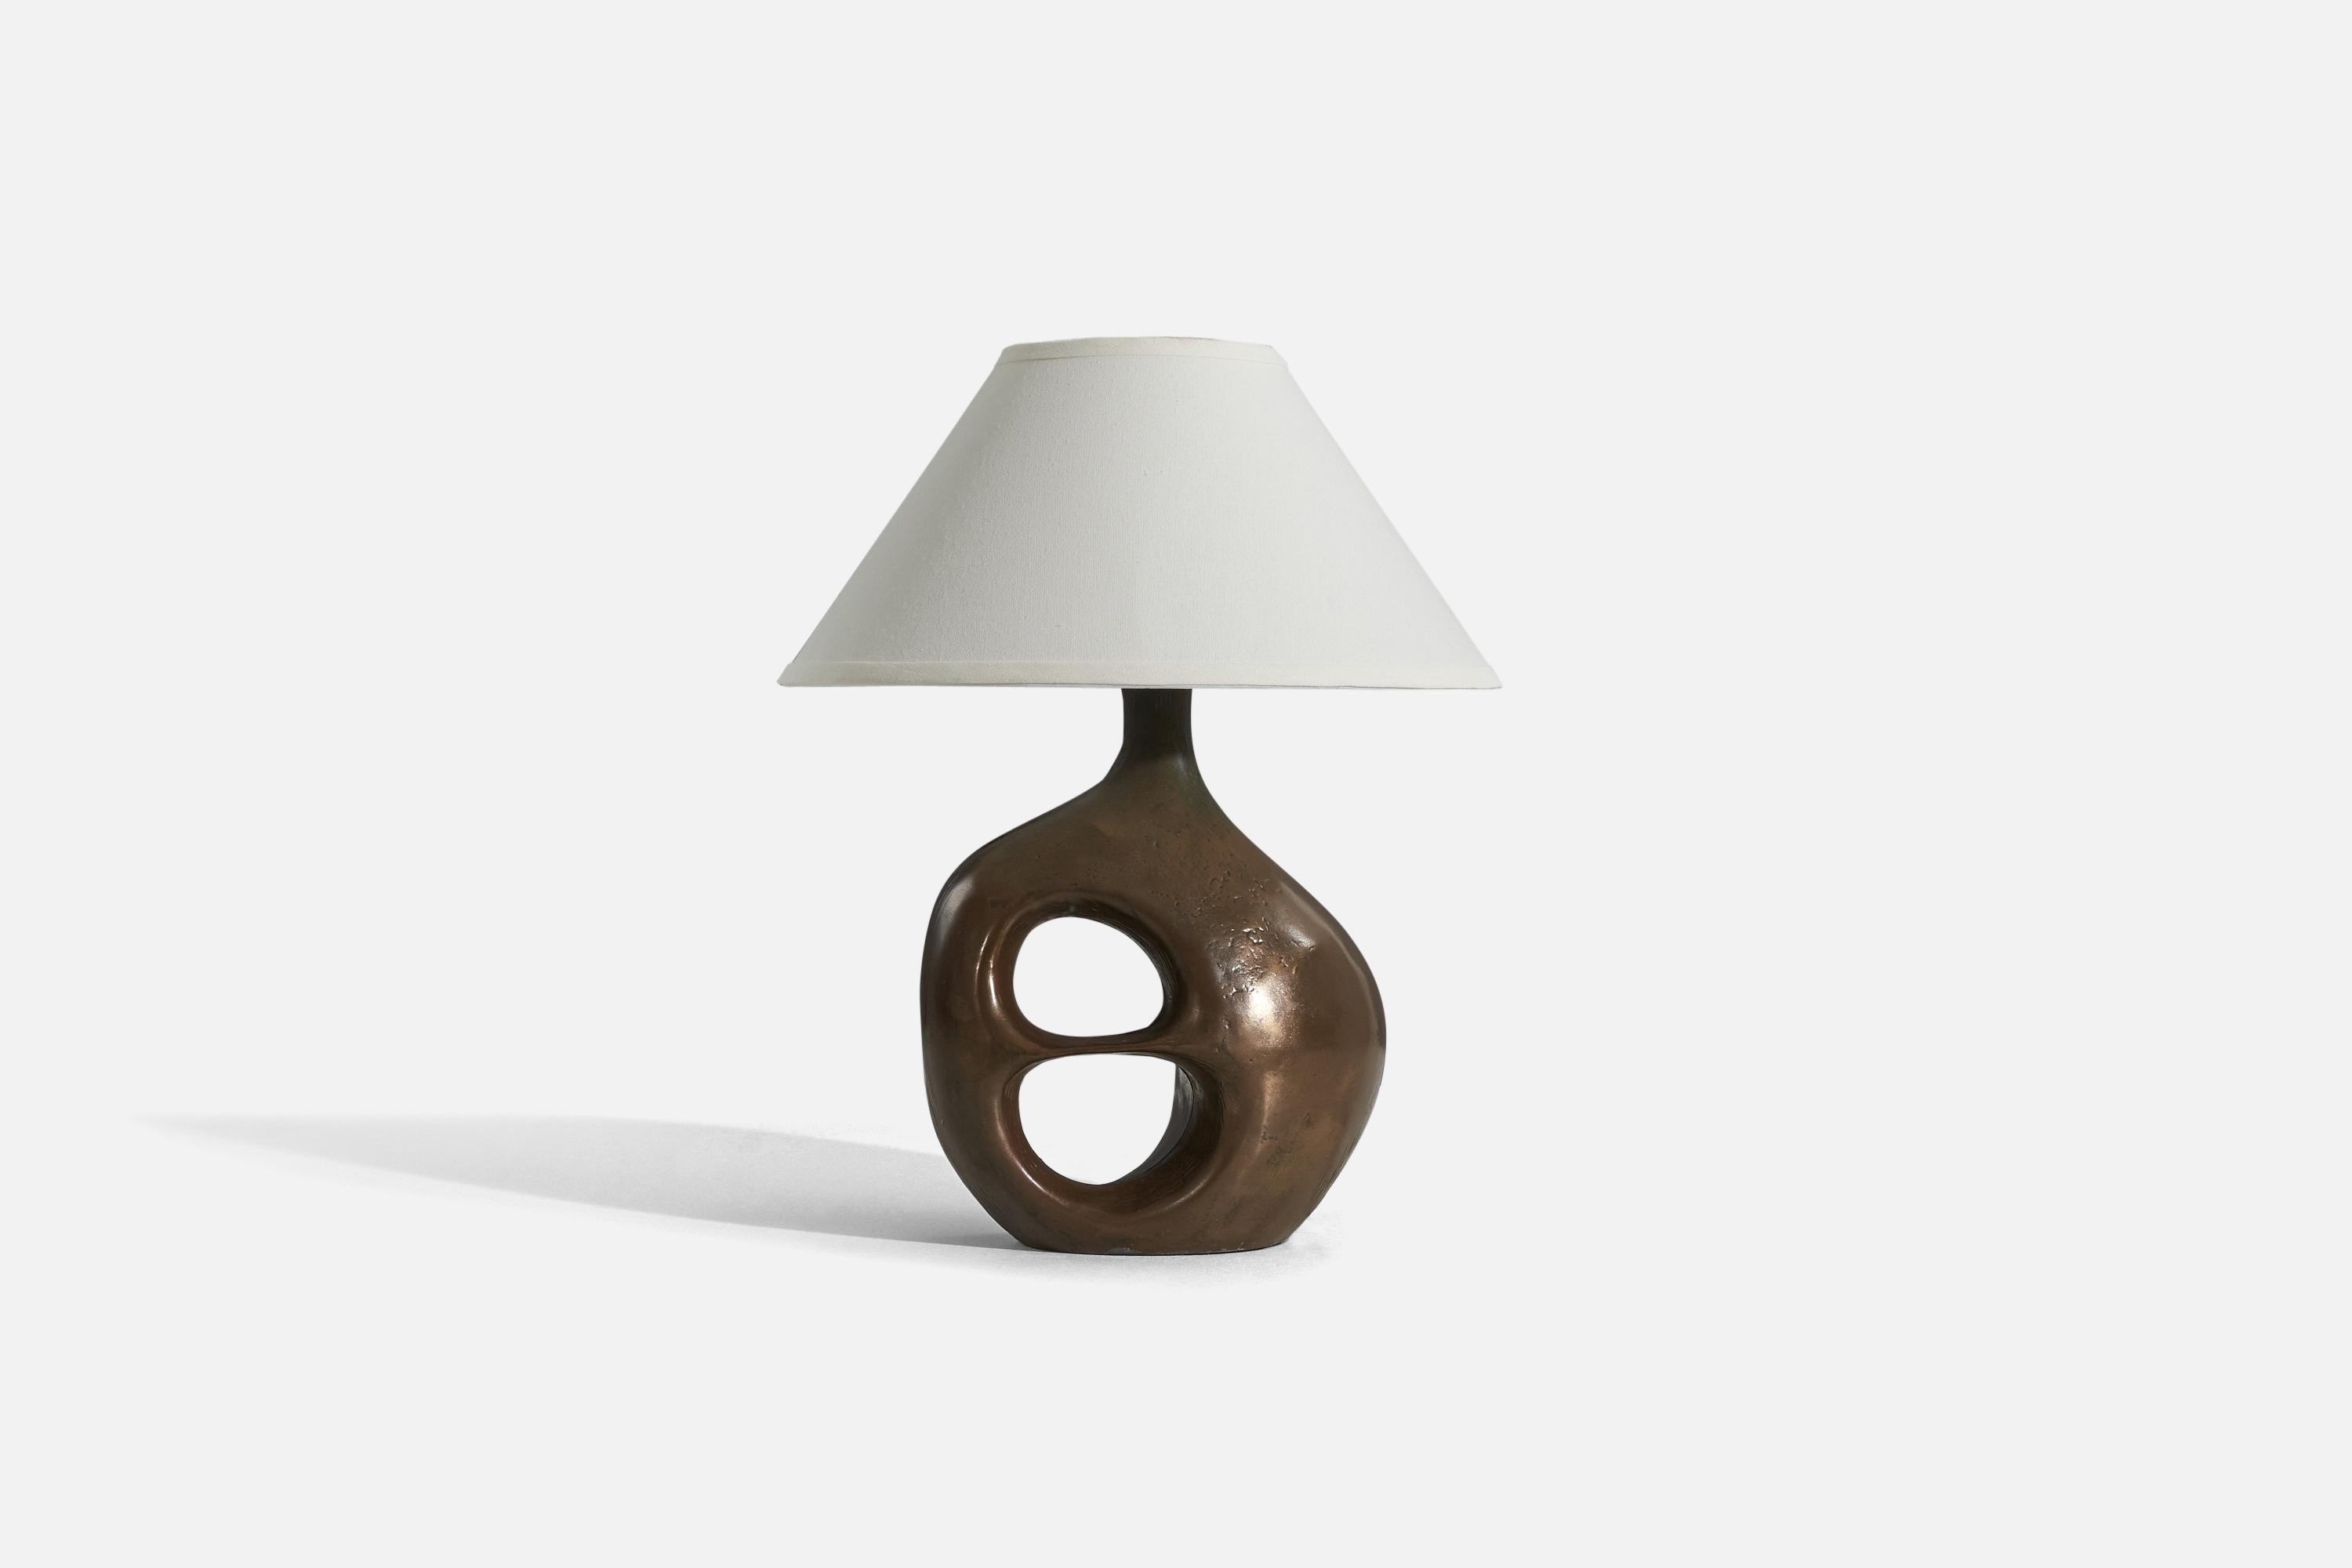 A bronze table lamp designed and produced in the United States, c. 1960s.

Sold without lampshade. 
Dimensions of Lamp (inches) : 17.5625 x 11.125 x 8 (H x W x D)
Dimensions of Shade (inches) : 6 x 16.25 x 9.25 (T x B x H)
Dimension of Lamp